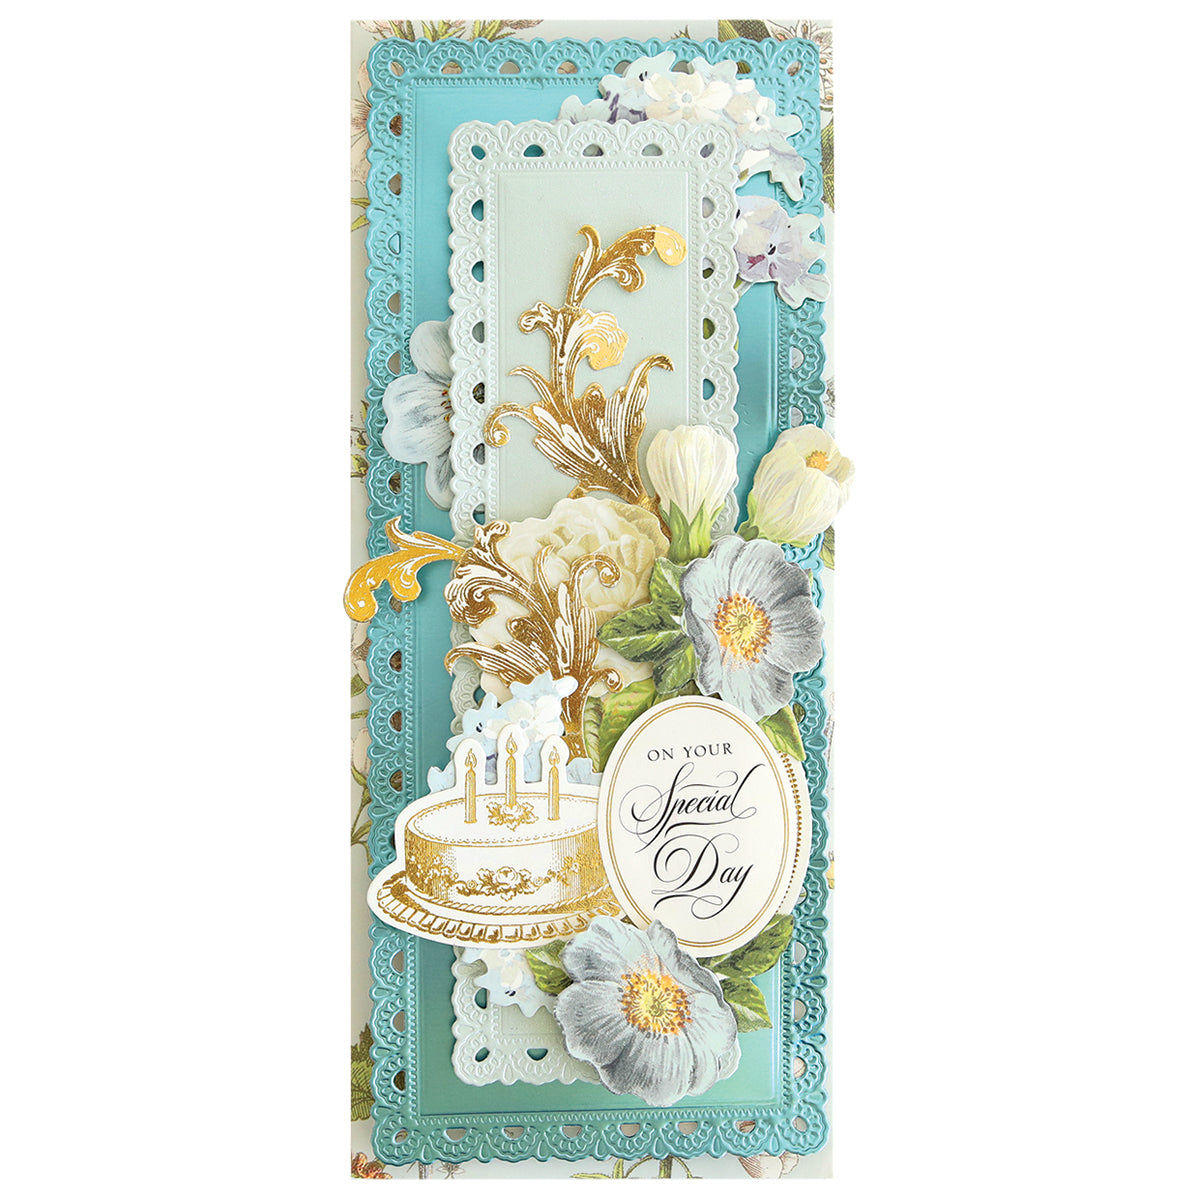 a card with a cake and flowers on it.